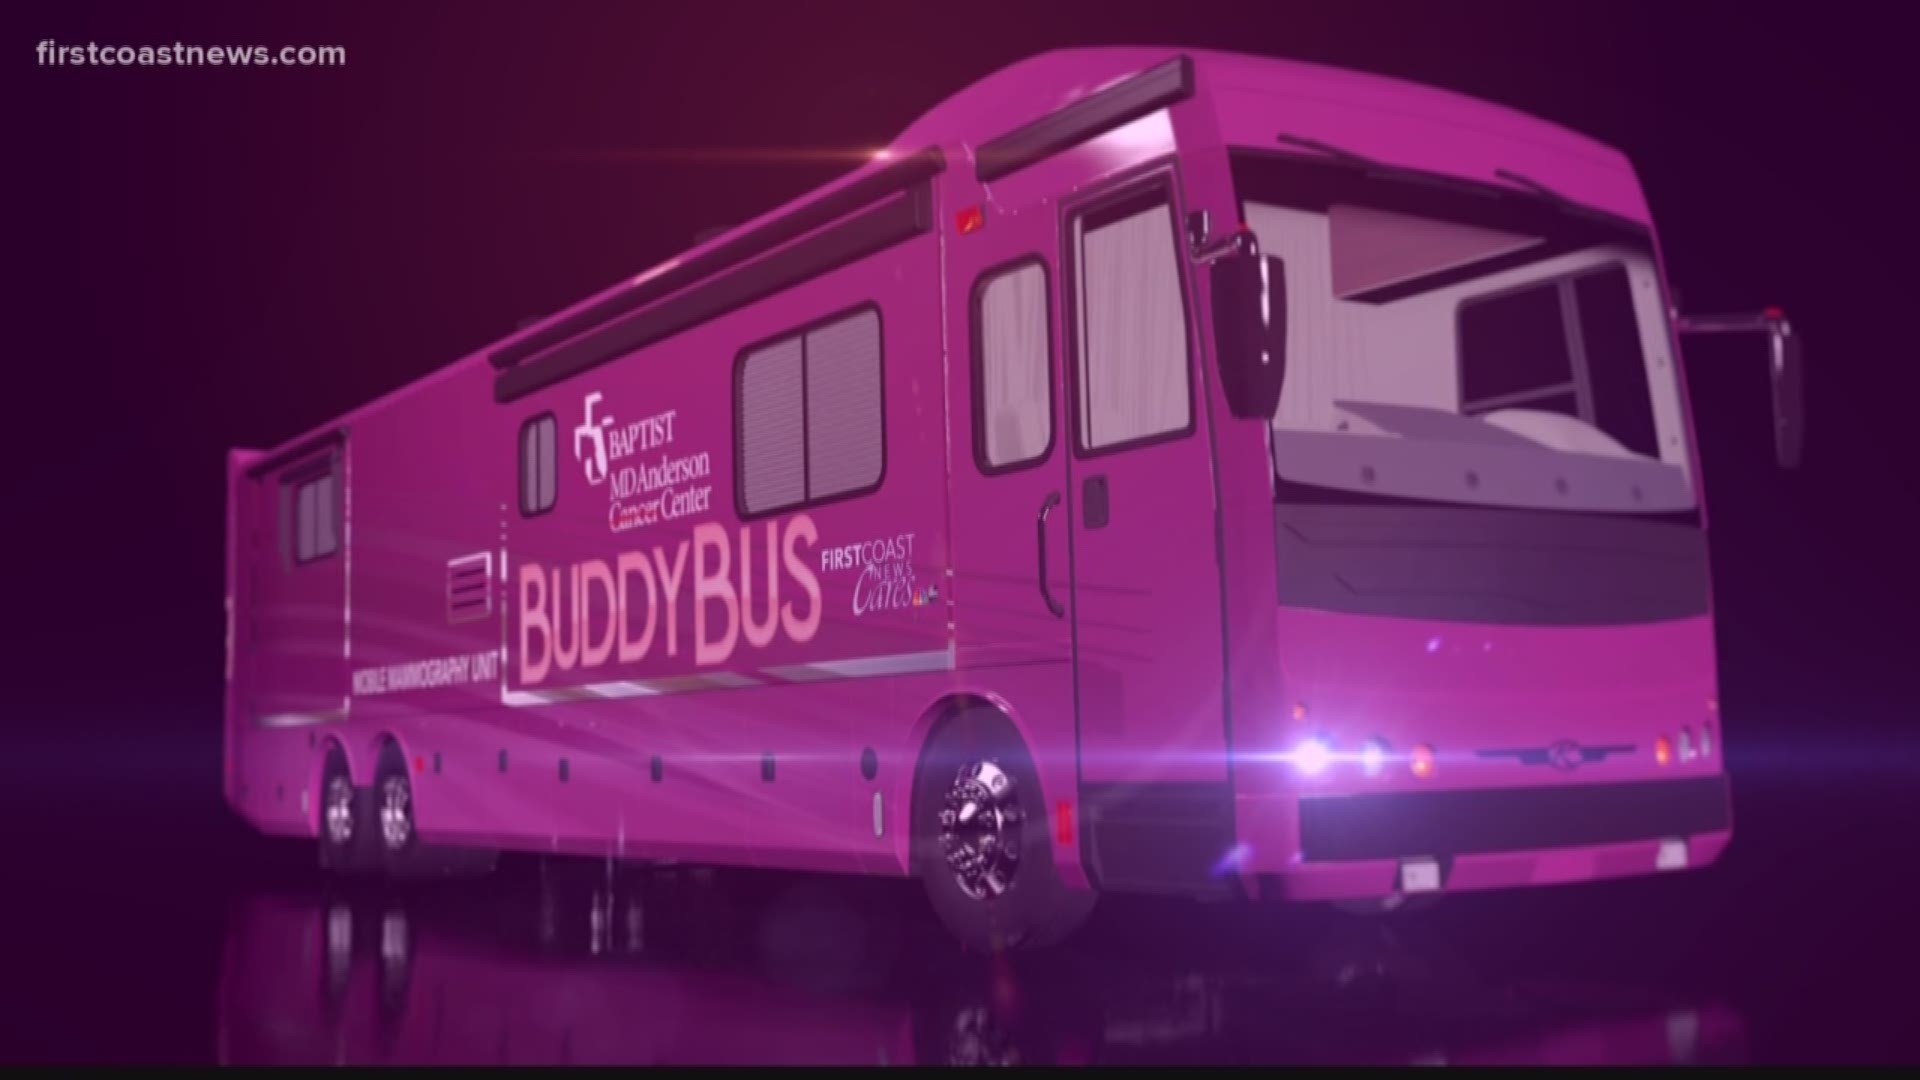 We are raising money to purchase the Buddy Bus, a bright pink mobile mammography unit. It's our new mission with Baptist/MD Anderson Cancer Center.